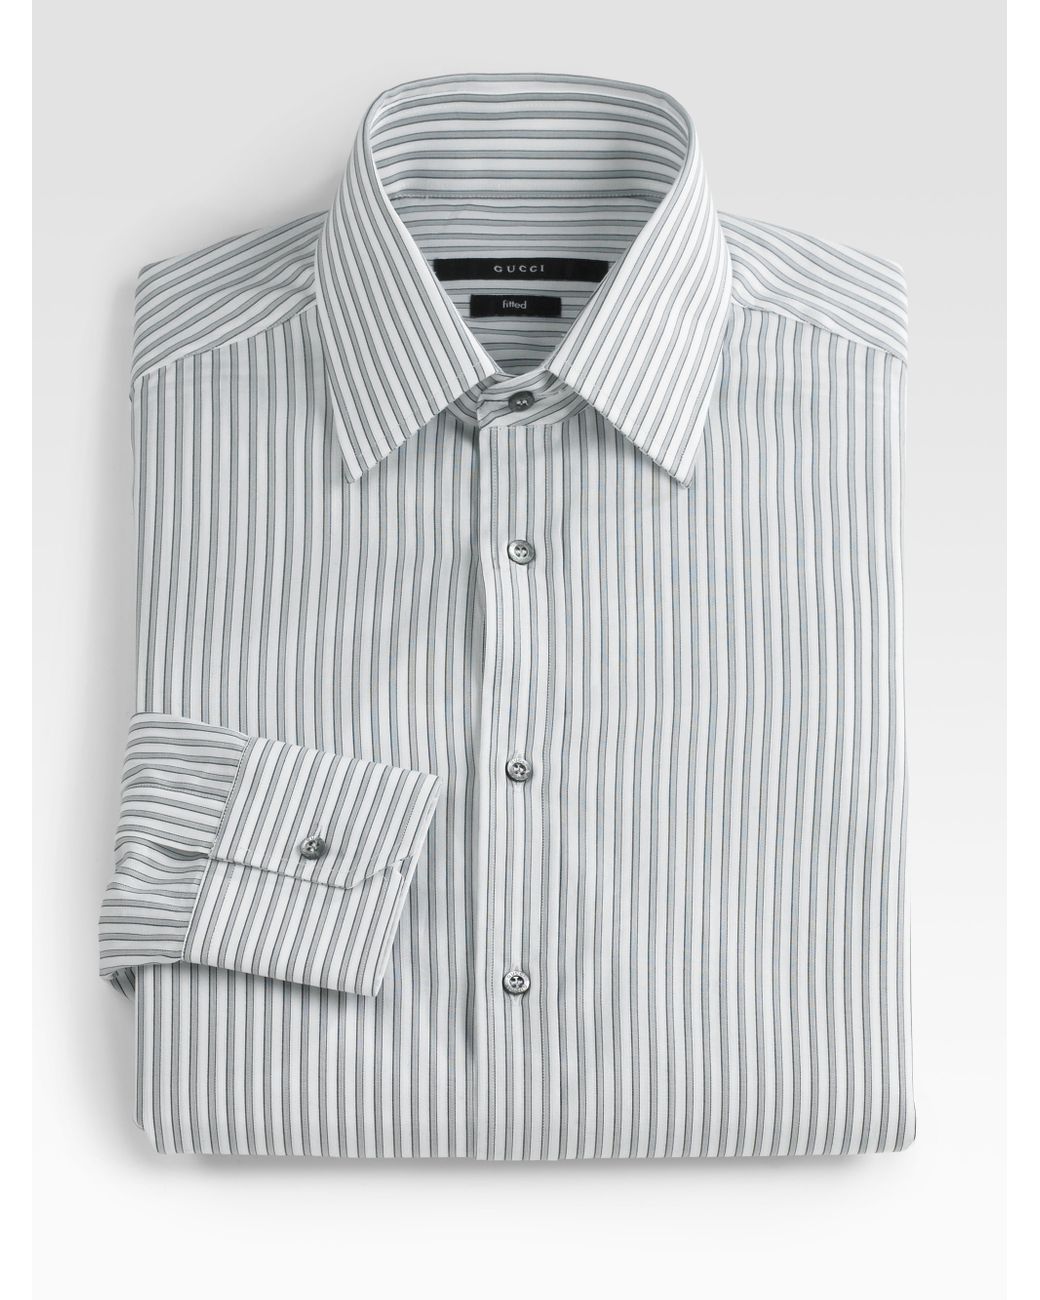 Gucci Striped Dress Shirt in Gray for Men